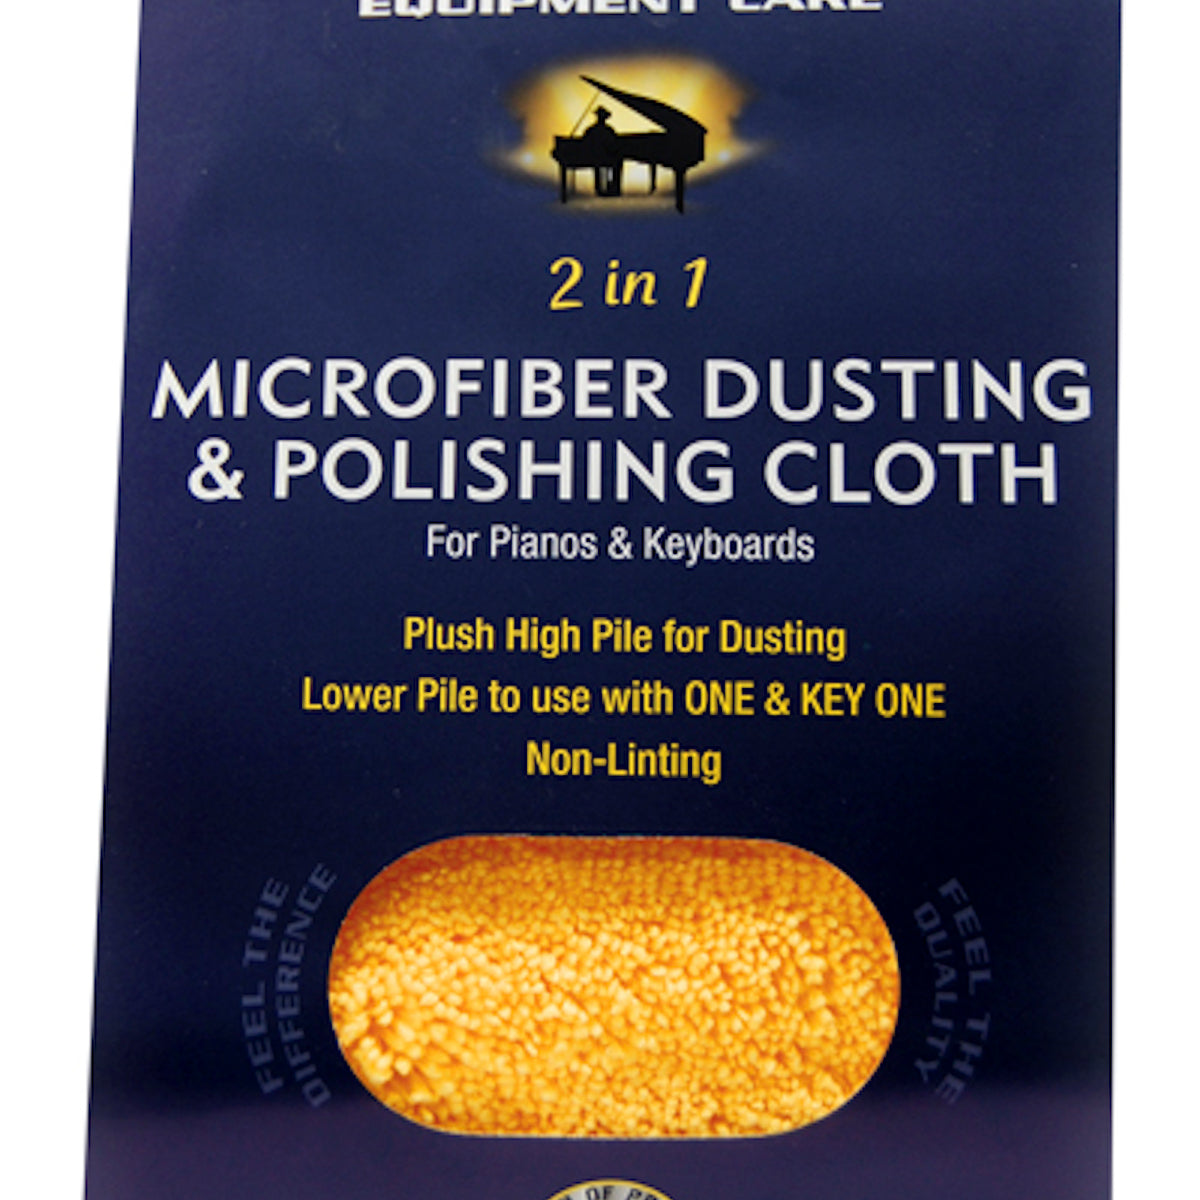 Music Nomad MN230 Microfiber Dusting & Polishing Cloth for Pianos &  Keyboards